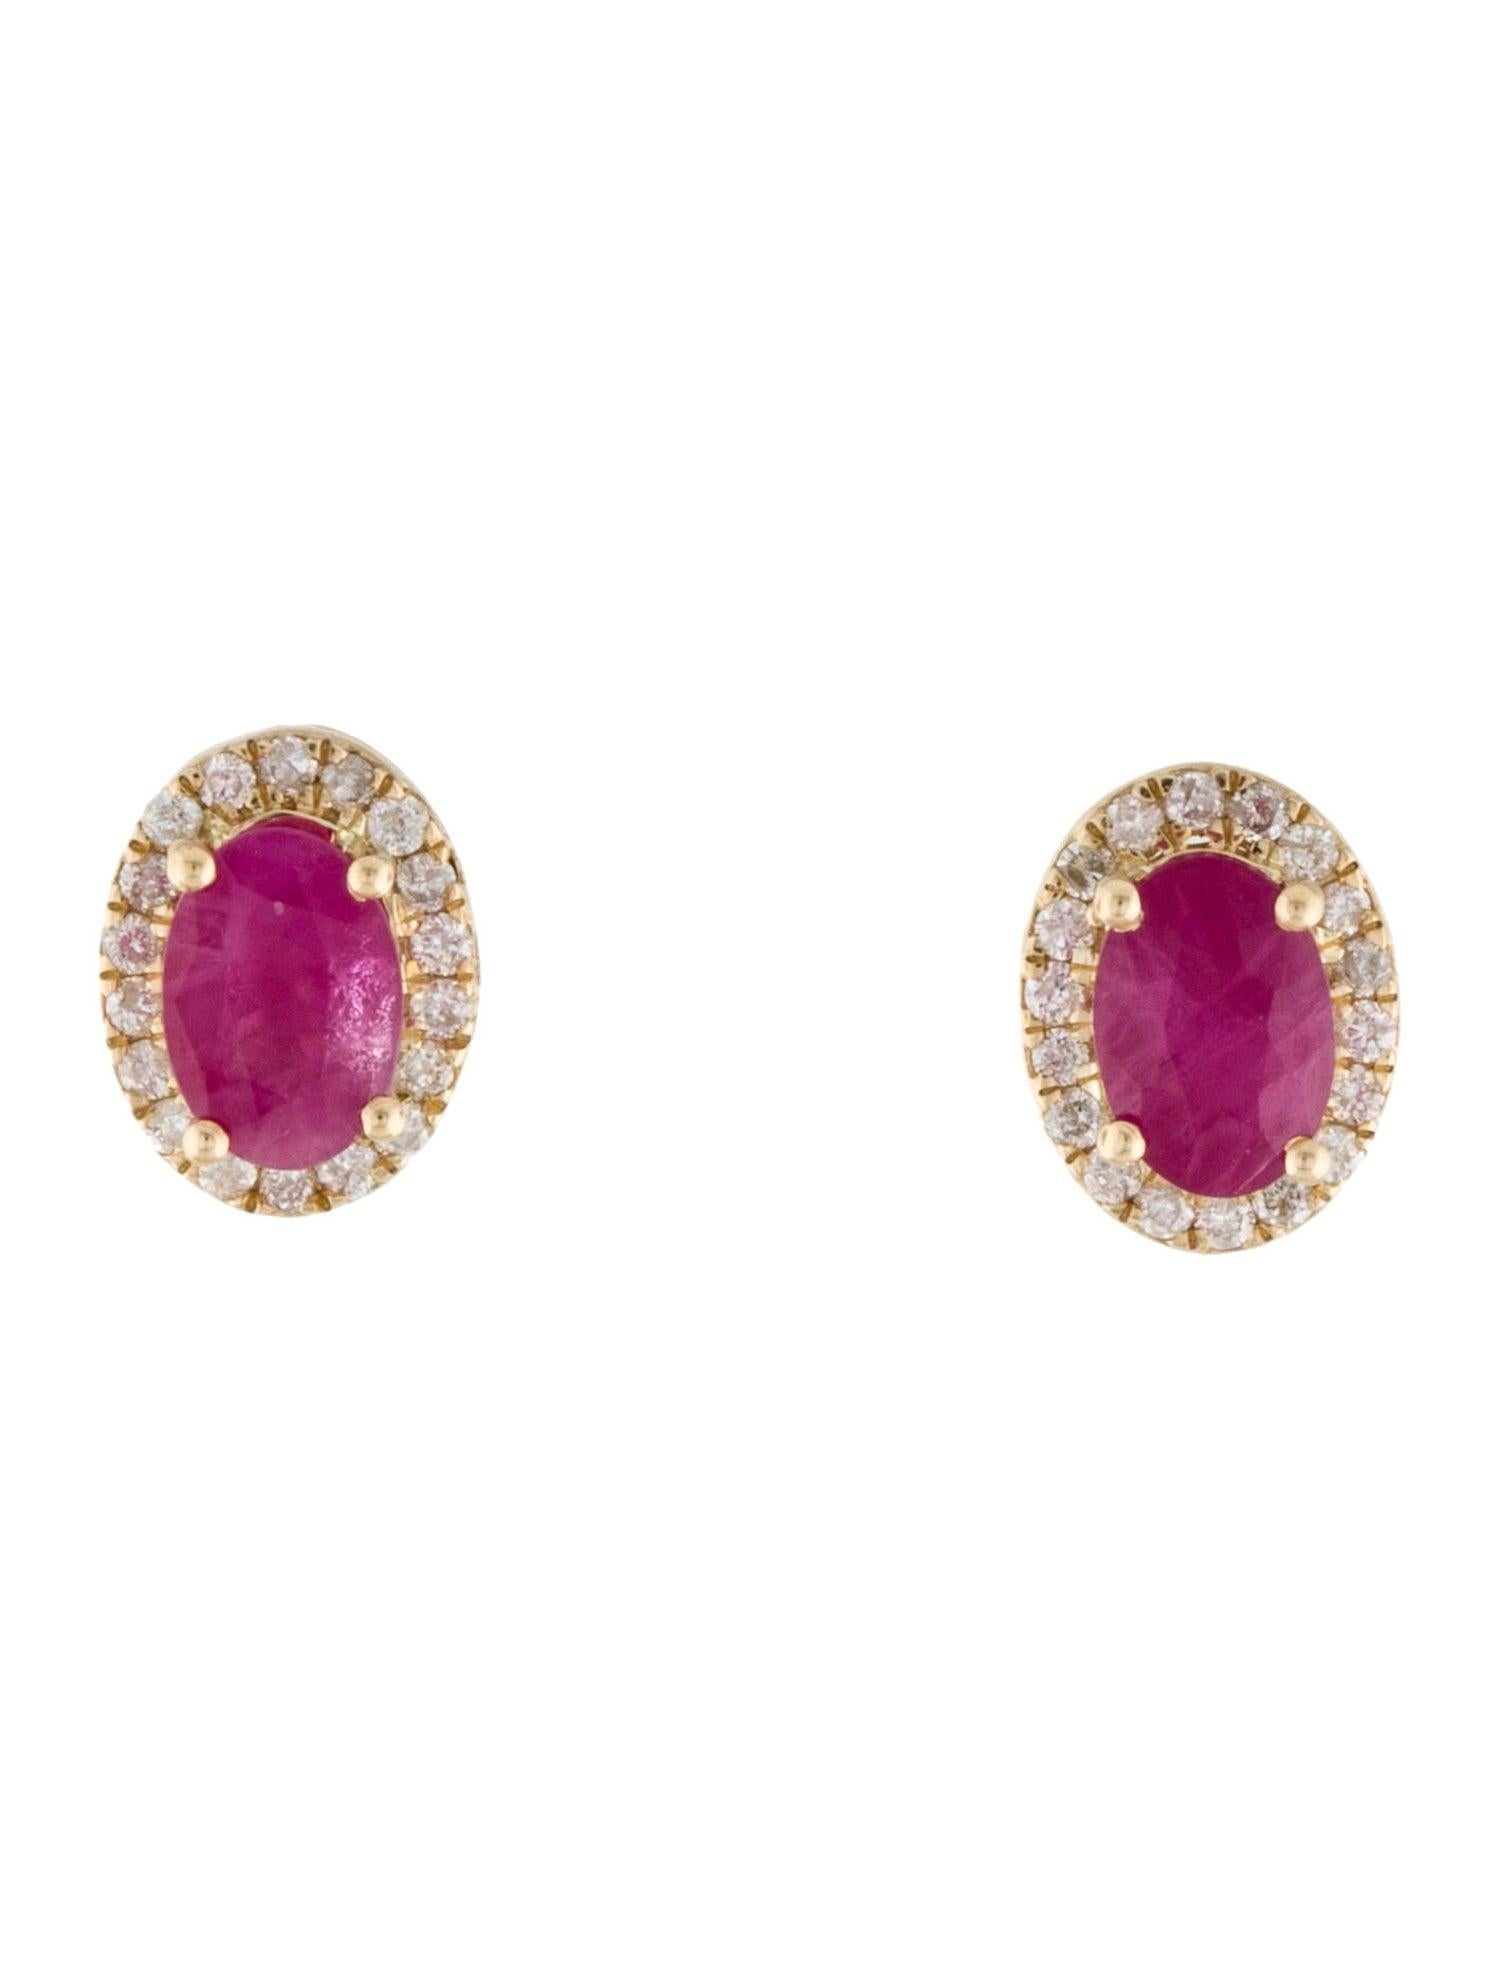 Stunning 14K 1.52ctw Ruby & Diamond Studs - Elegant Gemstone Earrings In New Condition For Sale In Holtsville, NY